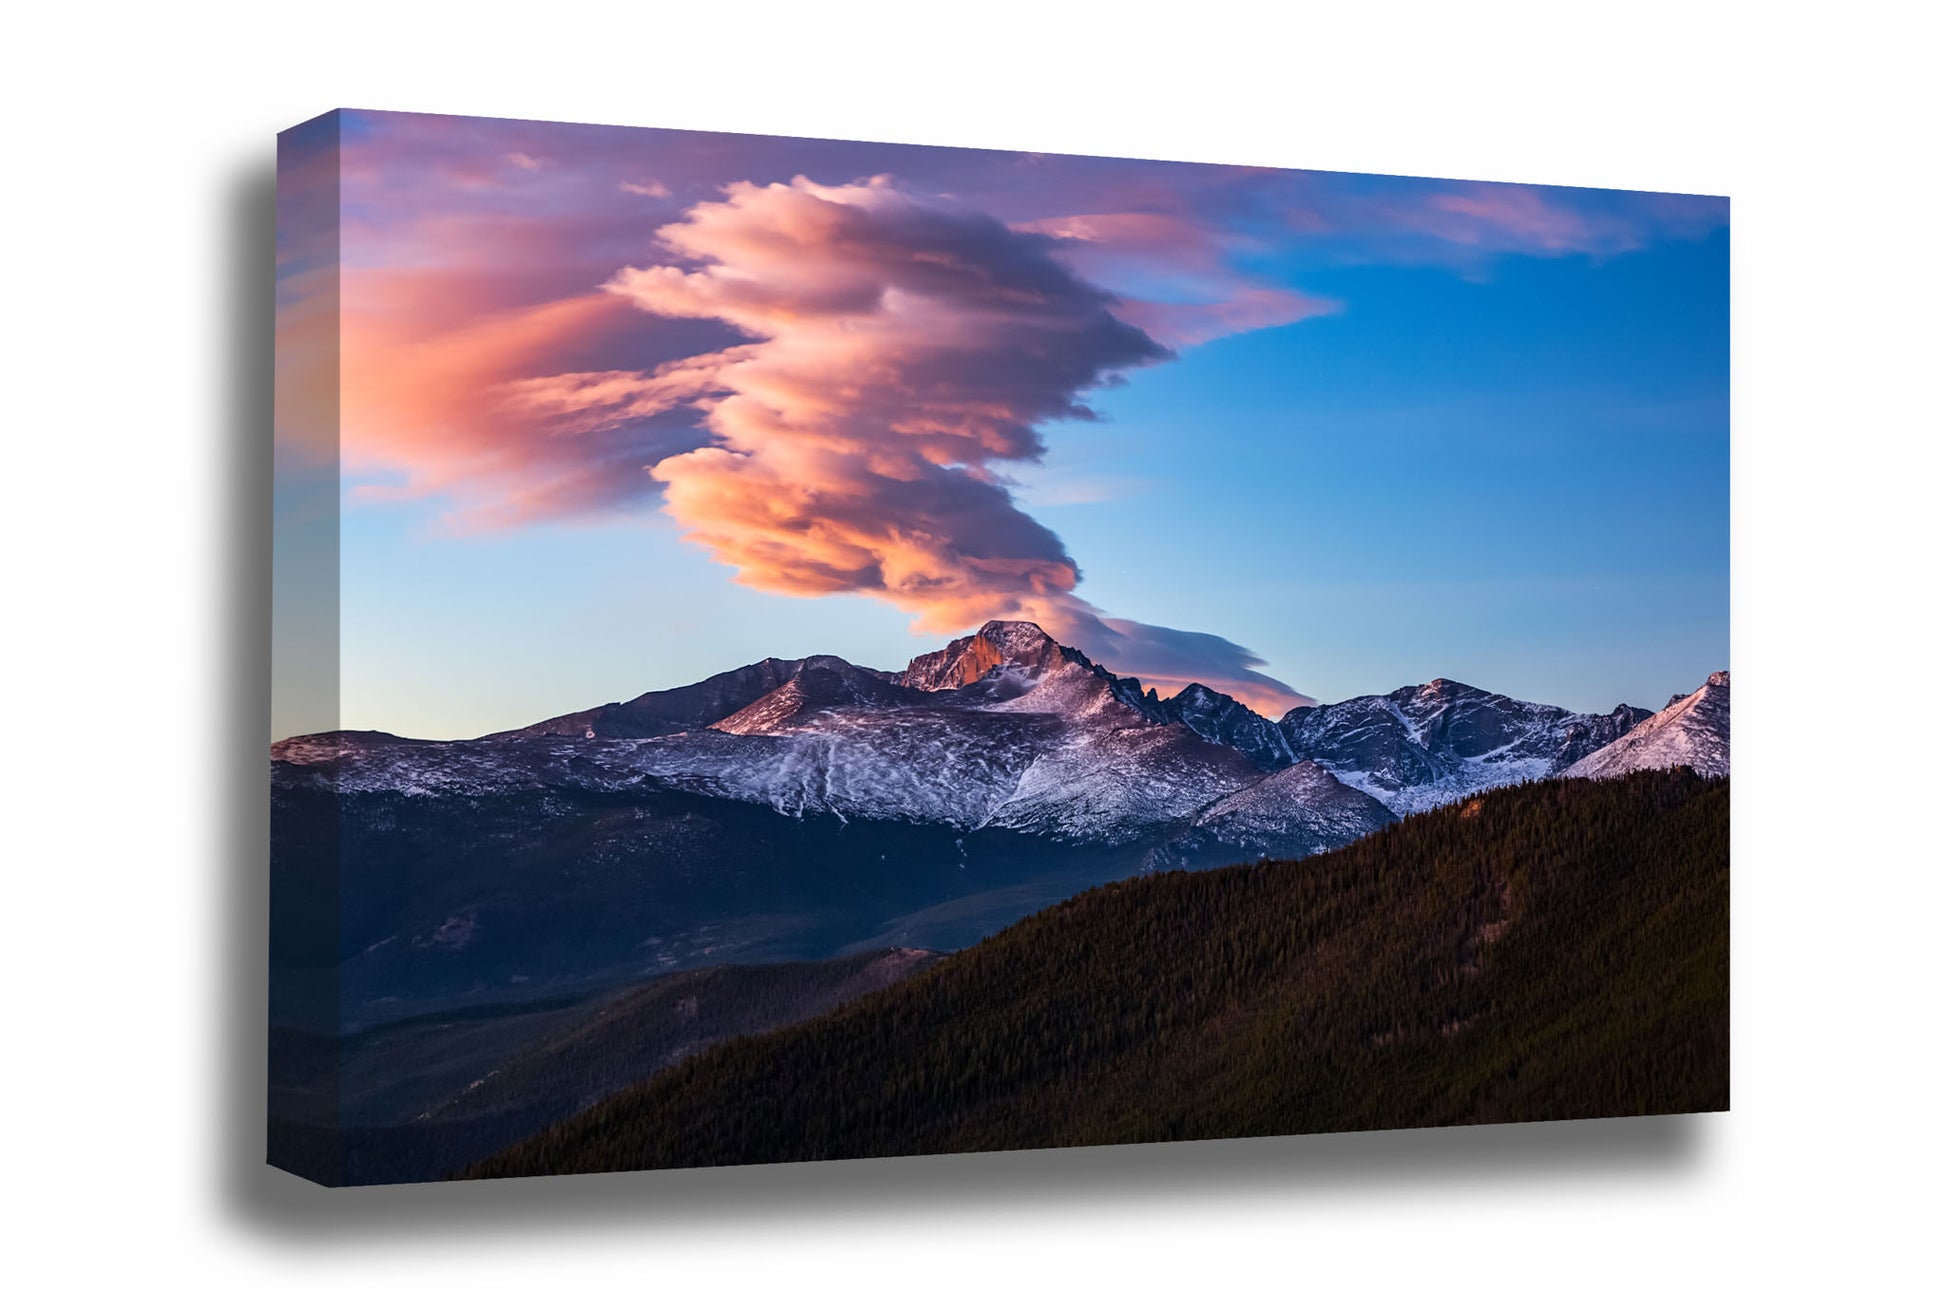 Western canvas wall art of clouds rising above Longs Peak on an autumn morning in Rocky Mountain National Park, Colorado by Sean Ramsey of Southern Plains Photography.